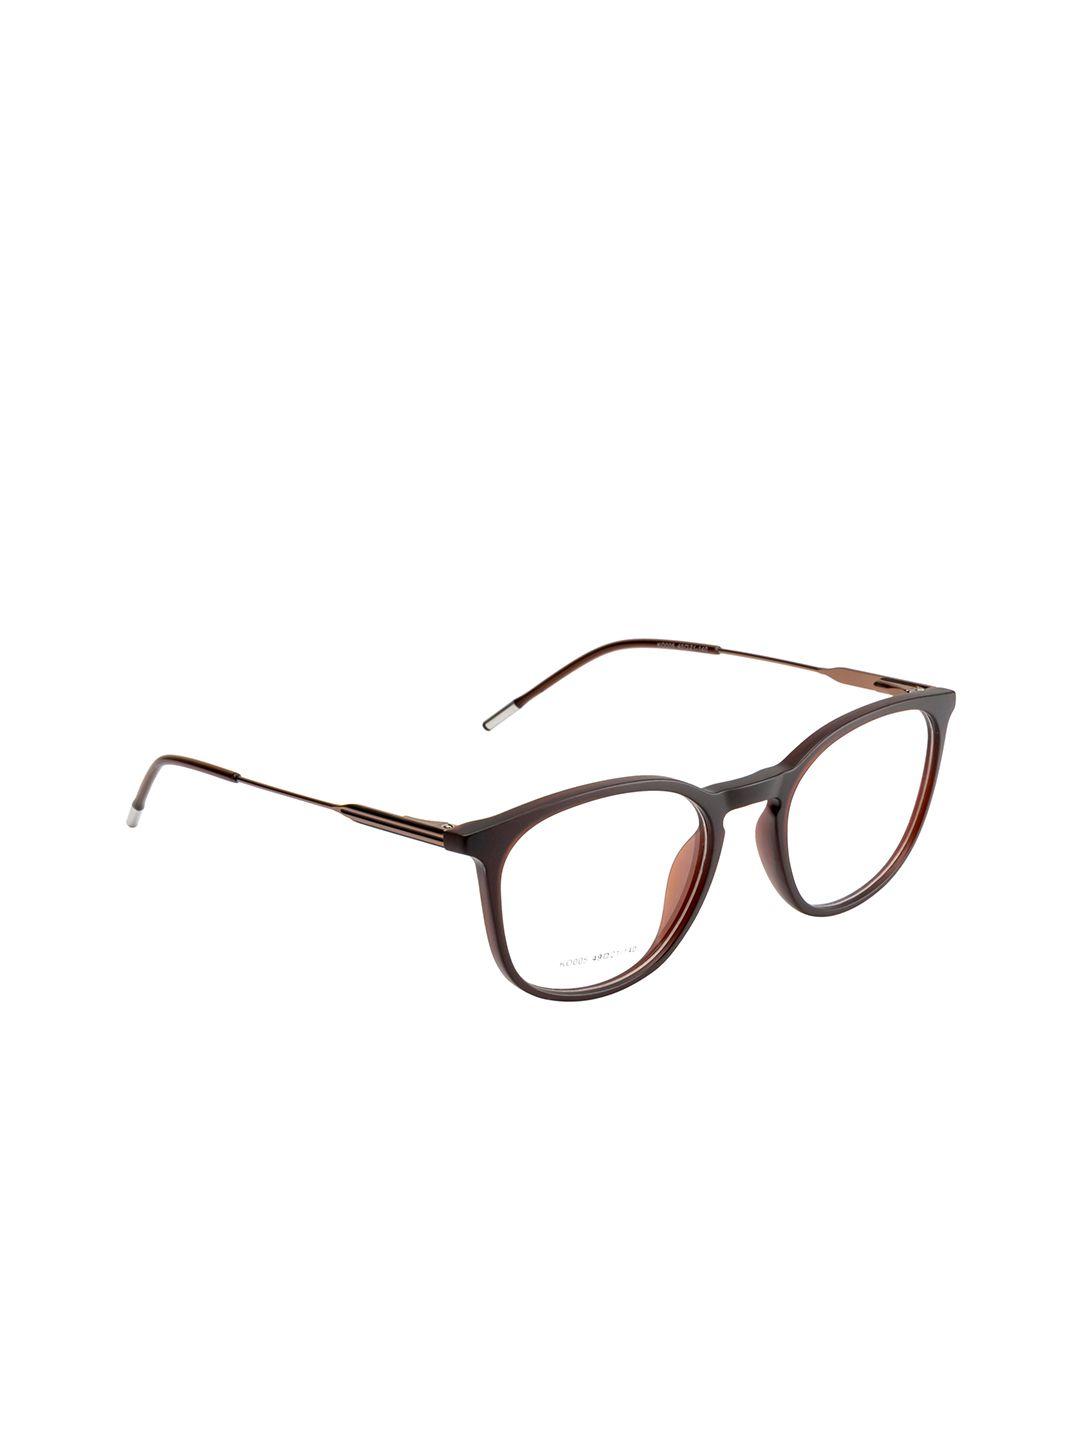 ted smith unisex brown solid full rim round frames eyeglasses